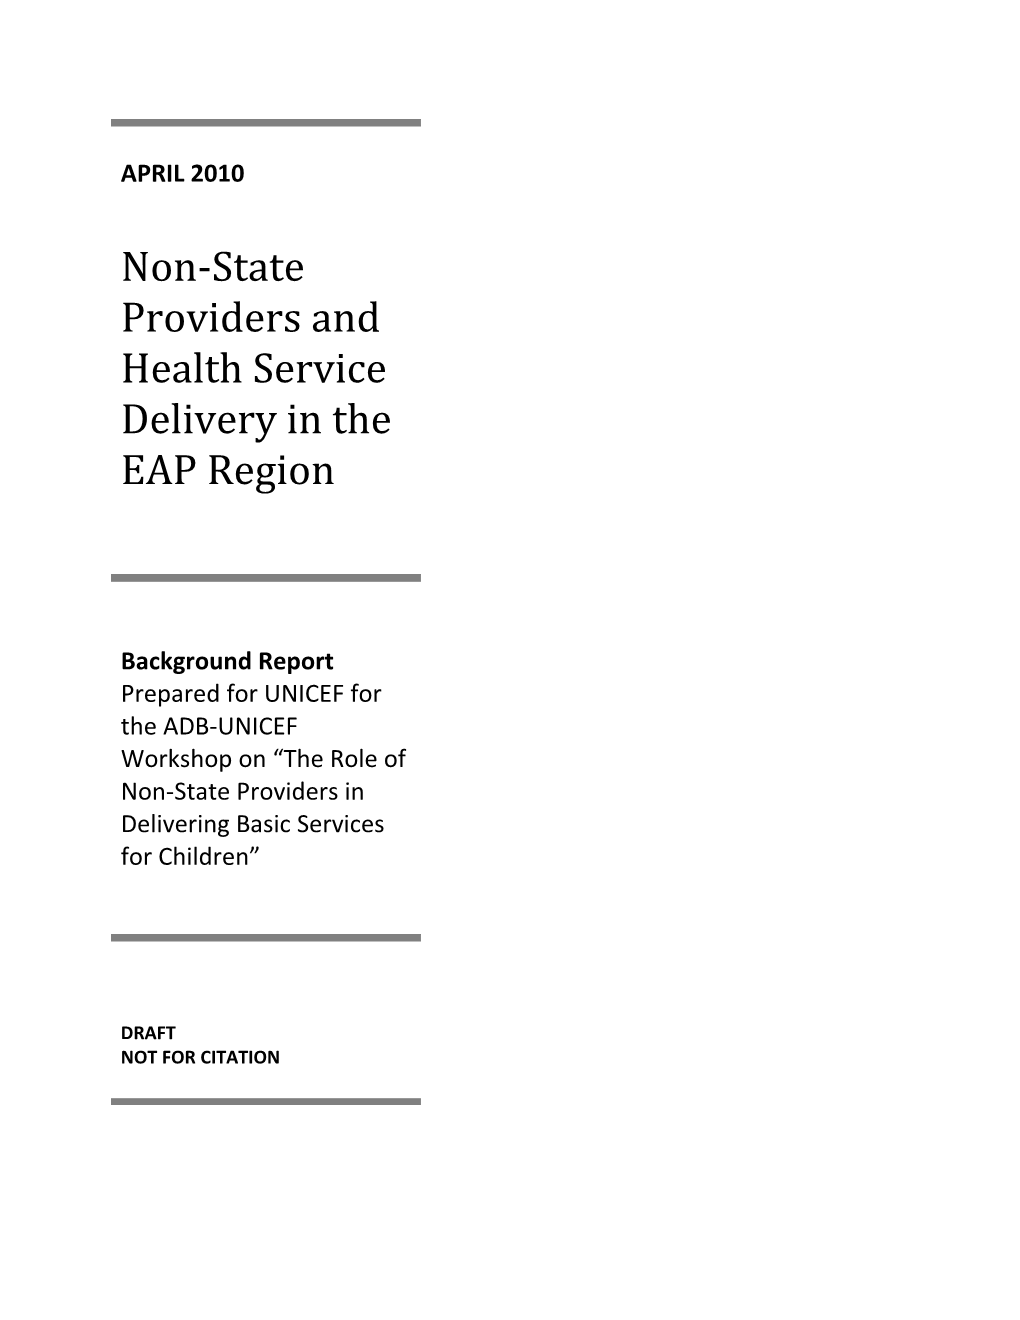 Non-State Providers and Health Services Delivery in the EAP Region